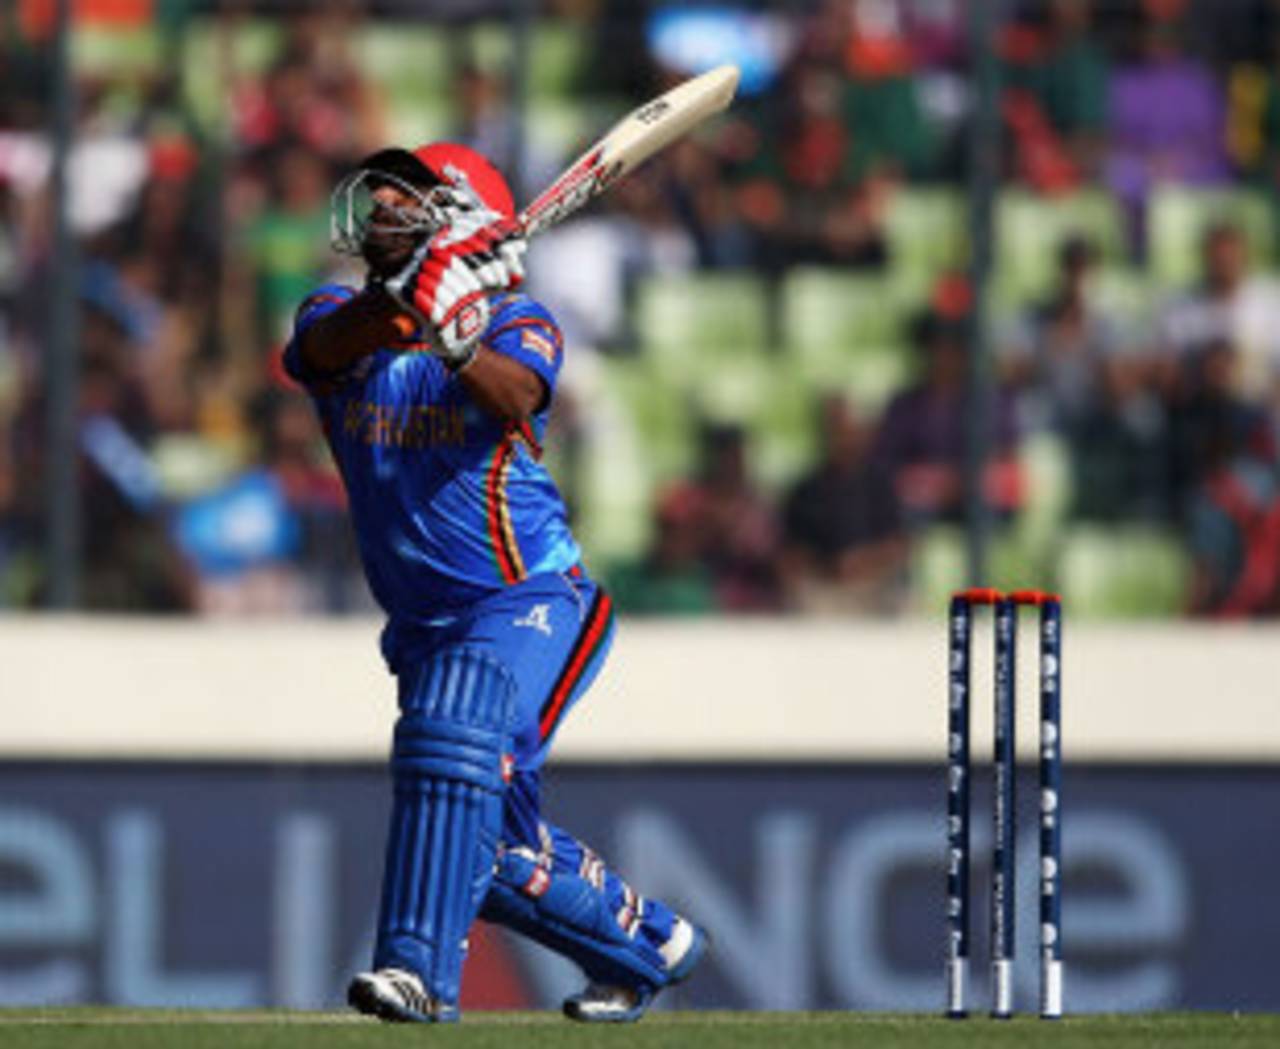 Mohammad Nabi was hopeful that the pitch in Chittagong would assist his team's stroke-players, like opener Mohammad Shahzad&nbsp;&nbsp;&bull;&nbsp;&nbsp;ICC